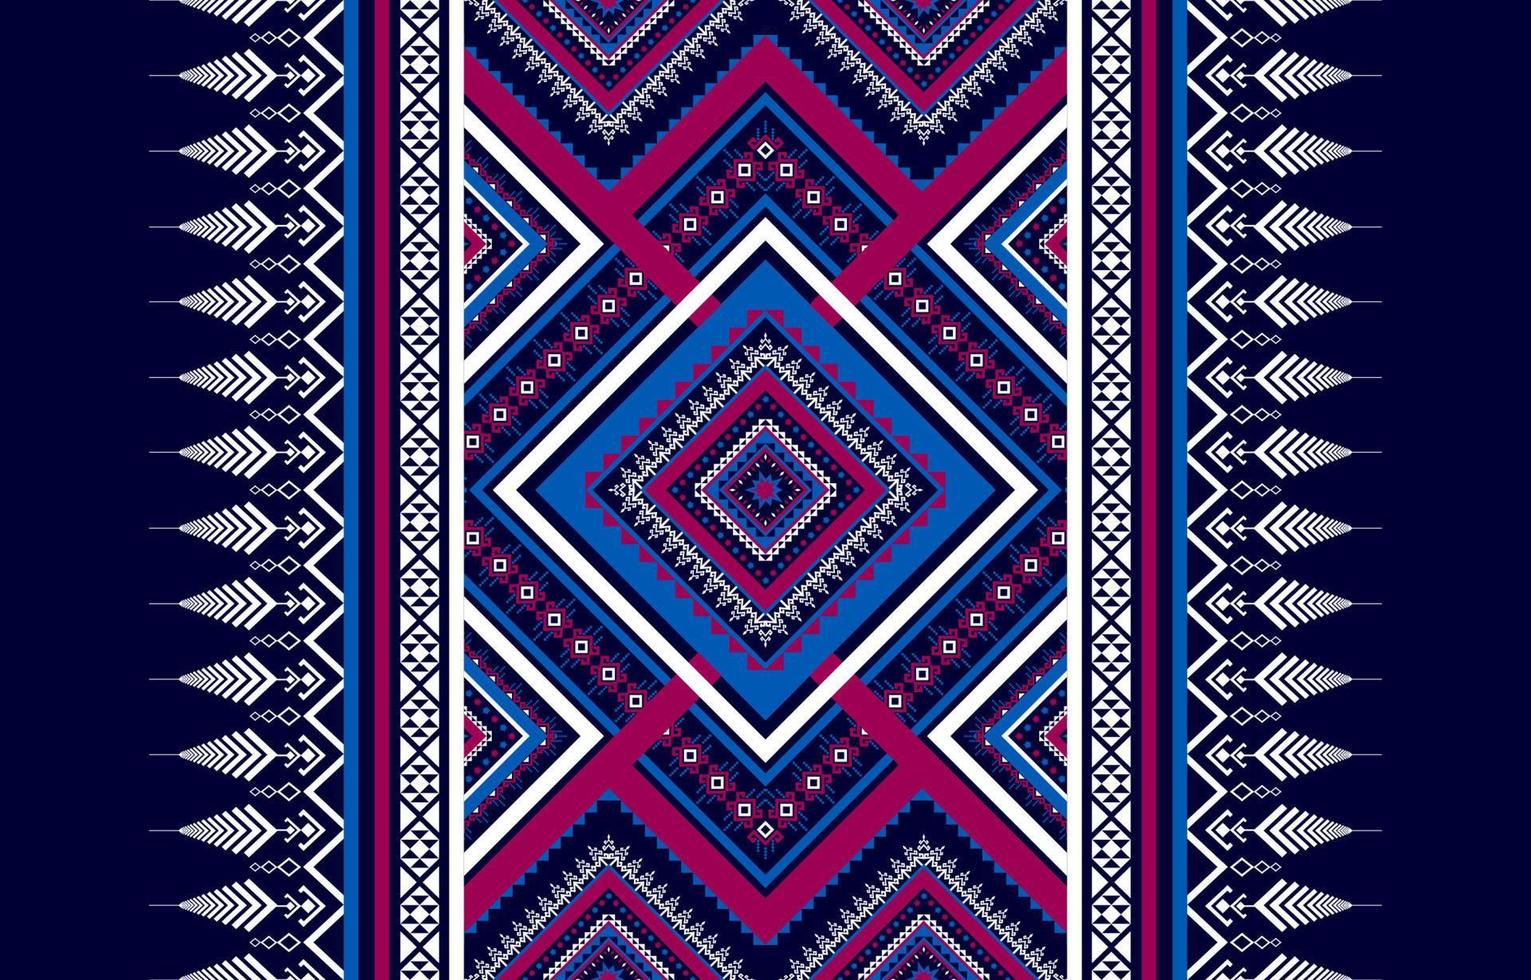 Geometric ethnic seamless pattern. Traditional tribal style. Design for background,illustration,texture,fabric,wallpaper,clothing,carpet,batik,embroidery vector